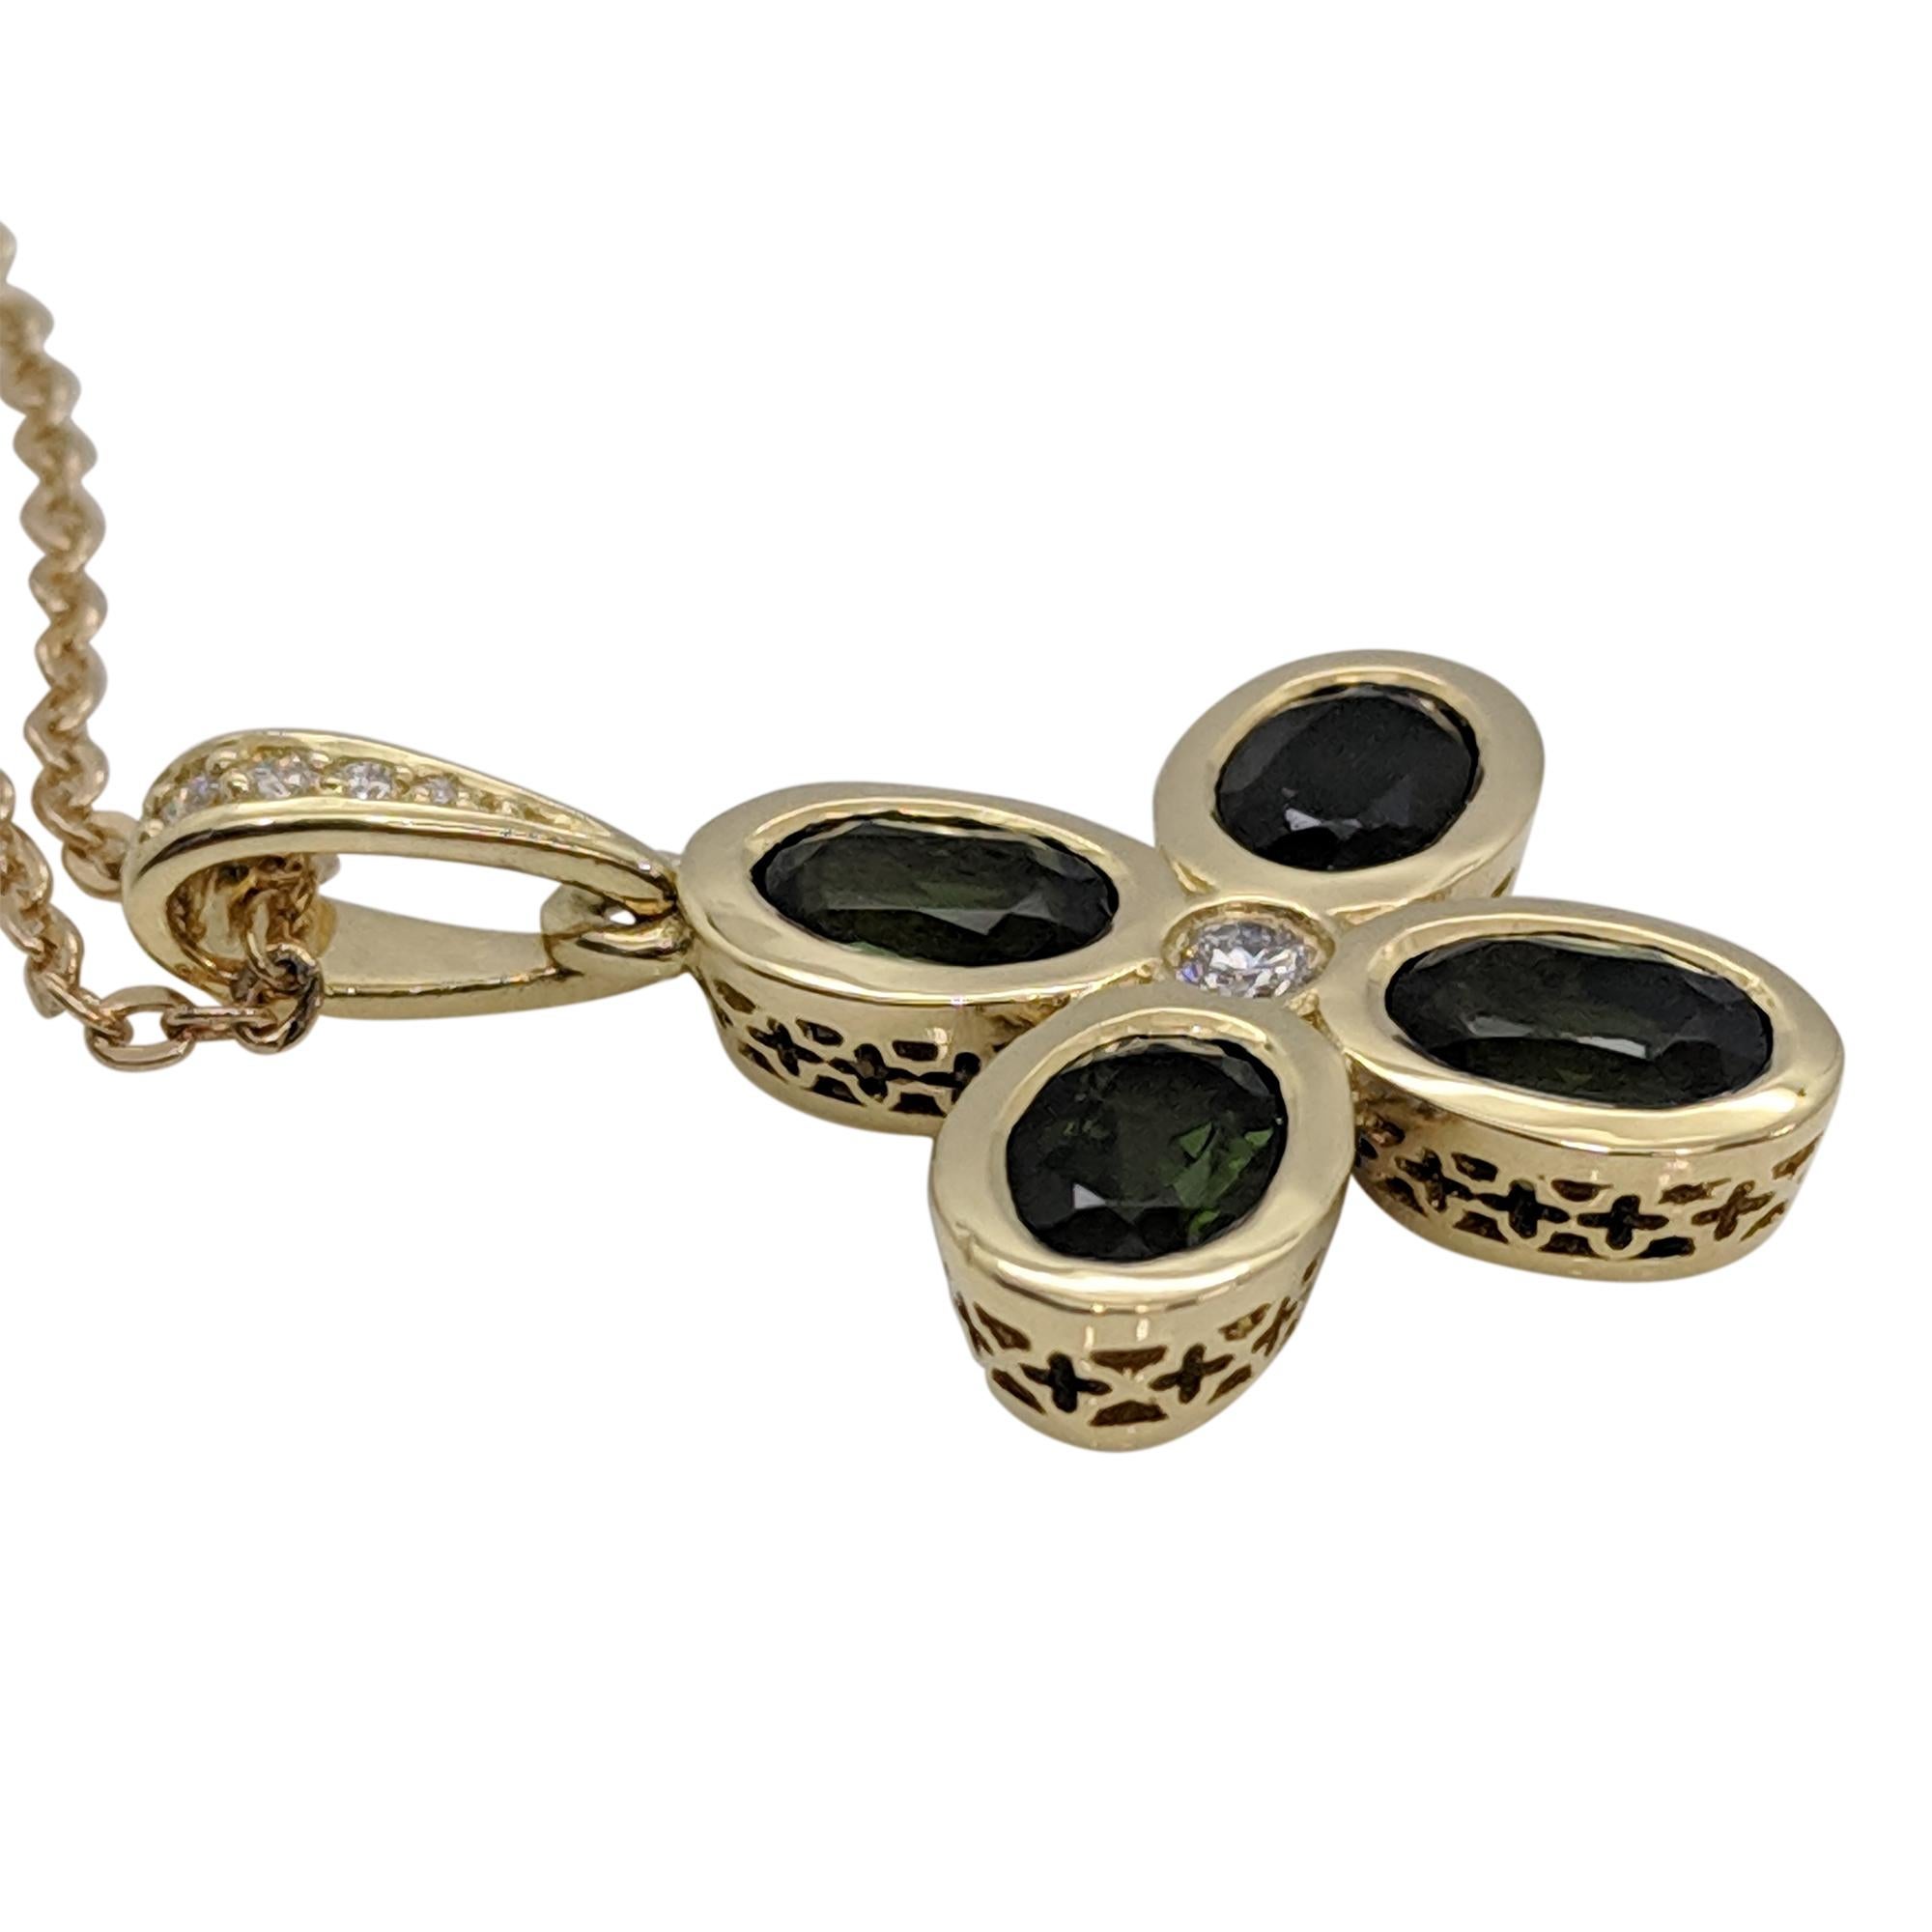 Tormalina & Diamante Necklace

This gorgeous 18 carat yellow gold necklace features four attractive chenier set green tourmalines arranged around a central diamond. The setting is suspended from a tapered, diamond channel set bail through which an